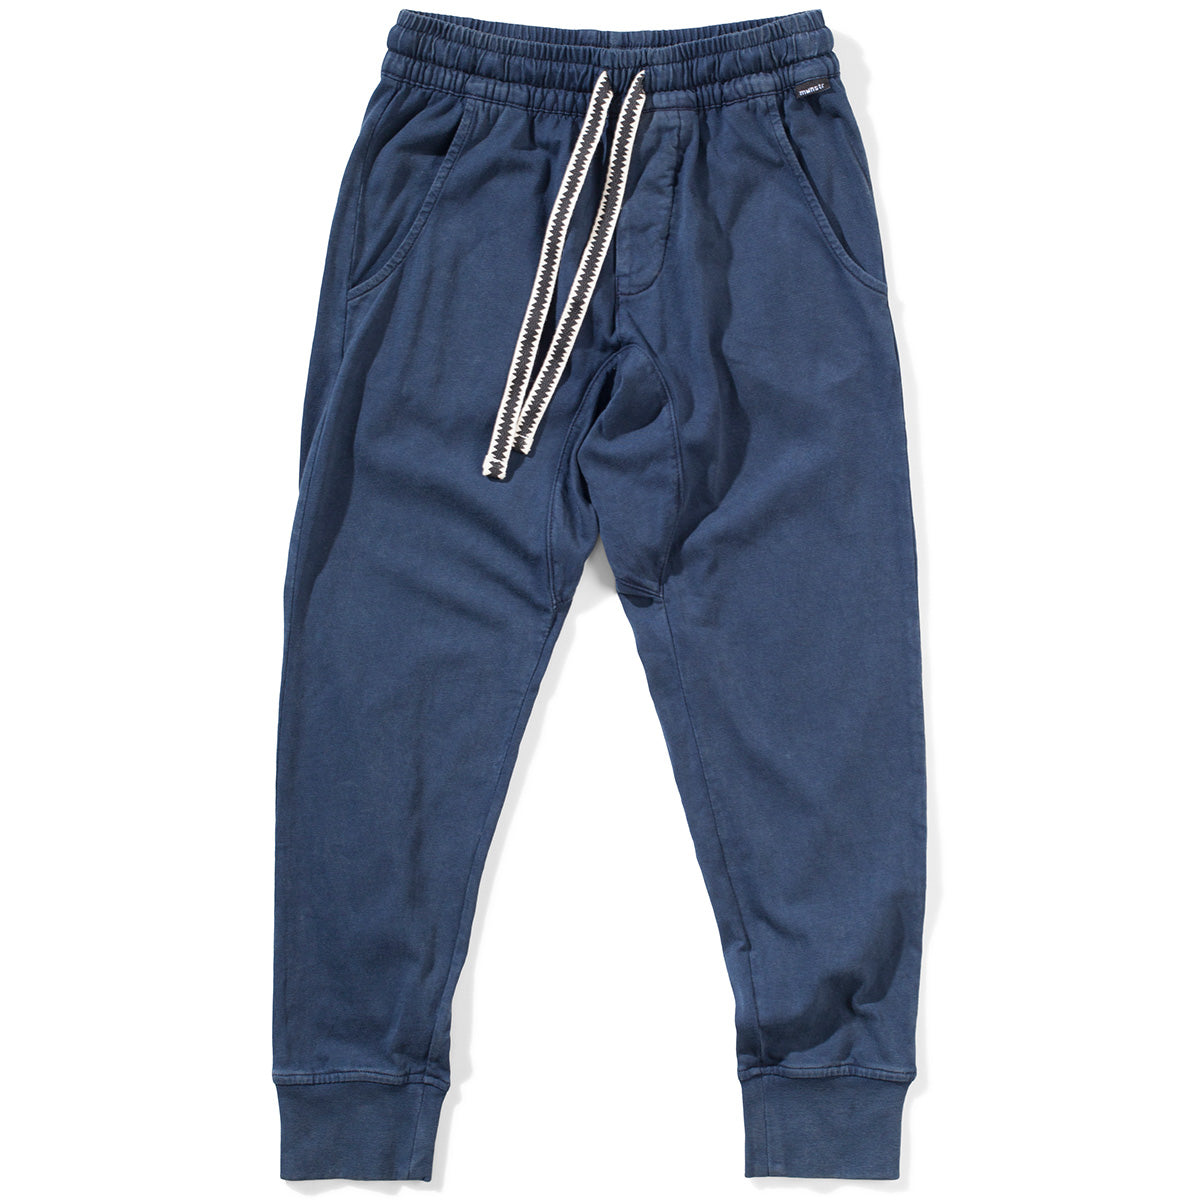 The Putyourfeetup Pant from Munster. Back patch pocket, Close-fitting at ankles,  Elasticated waist, Adjustable.